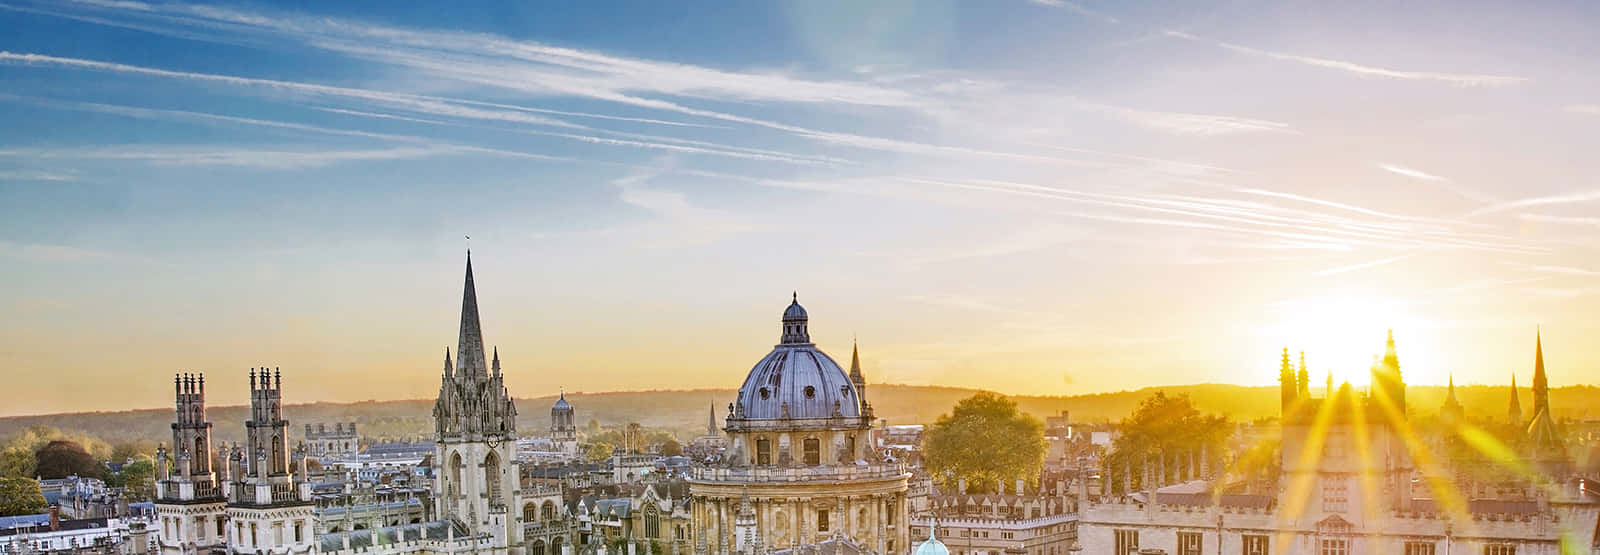 A Serene View Of Oxford City Skyline At Sunset Wallpaper